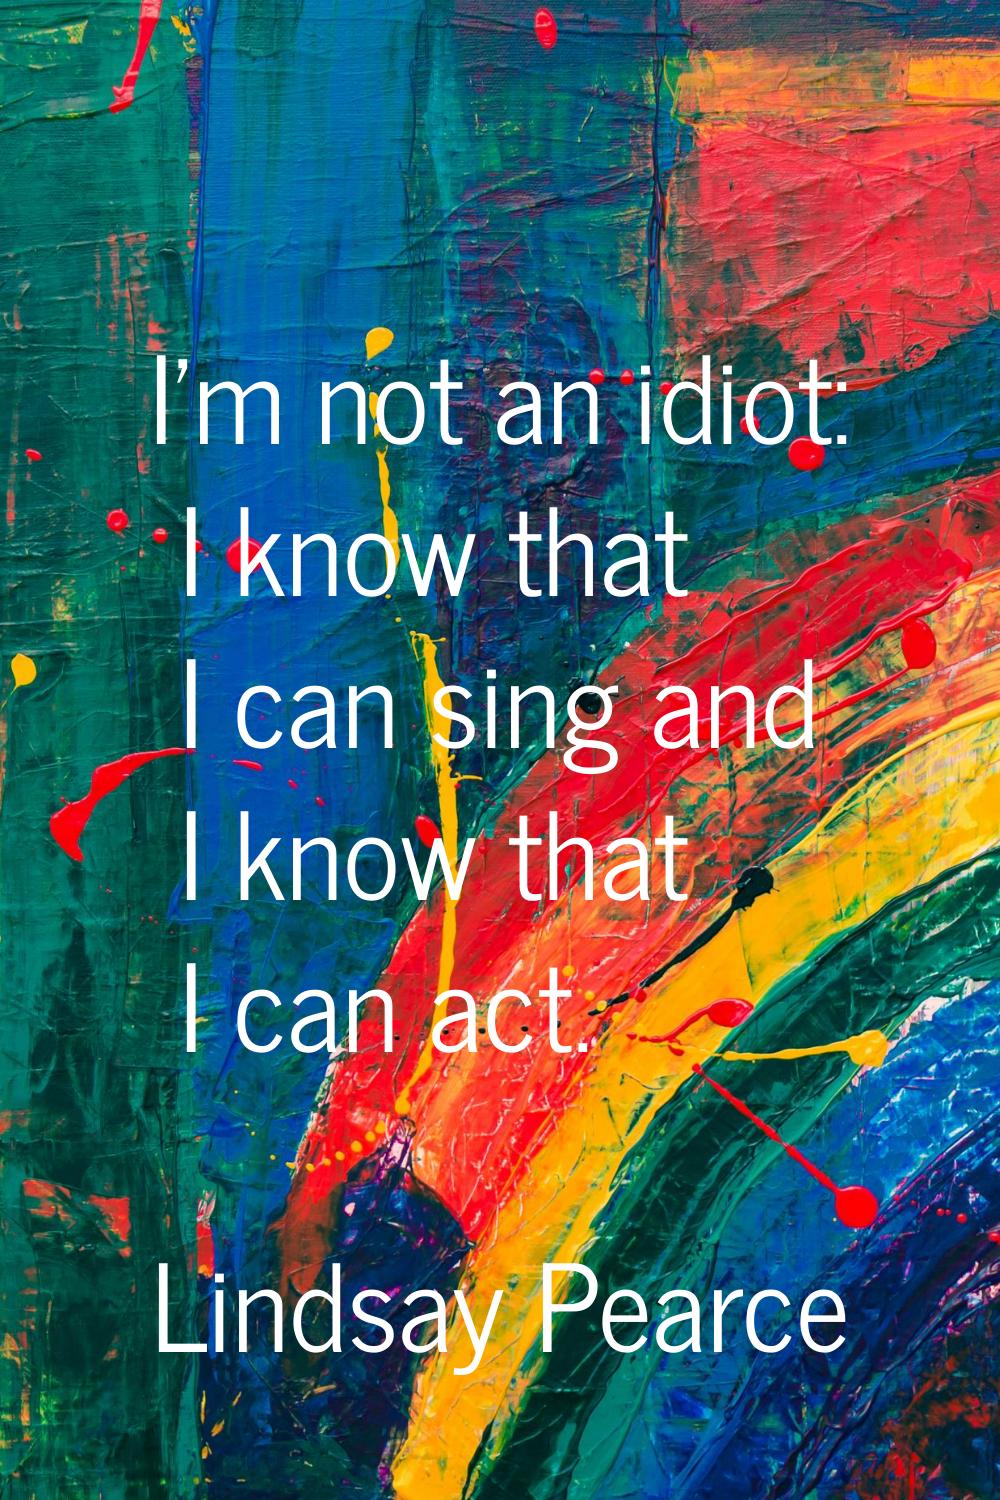 I'm not an idiot: I know that I can sing and I know that I can act.